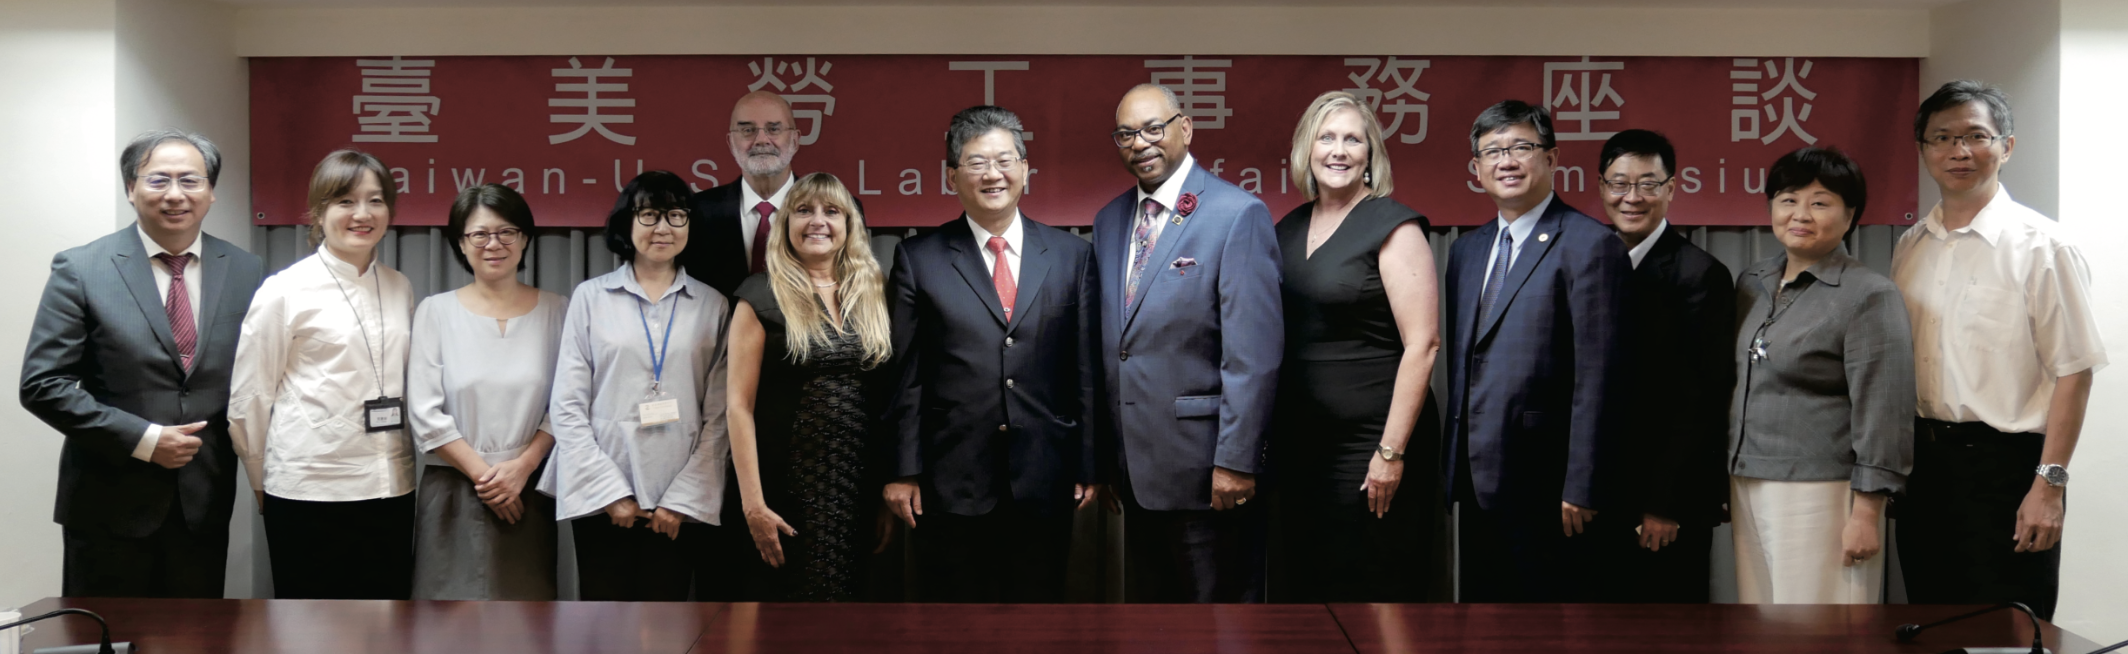 U.S. trade union leaders visit Taiwan and Ministry of Labor, participate in the Taiwan-U.S. Labor Affairs Symposium to strengthen substantive cooperation and exchange between trade unions and labor affairs in Taiwan and the U.S.